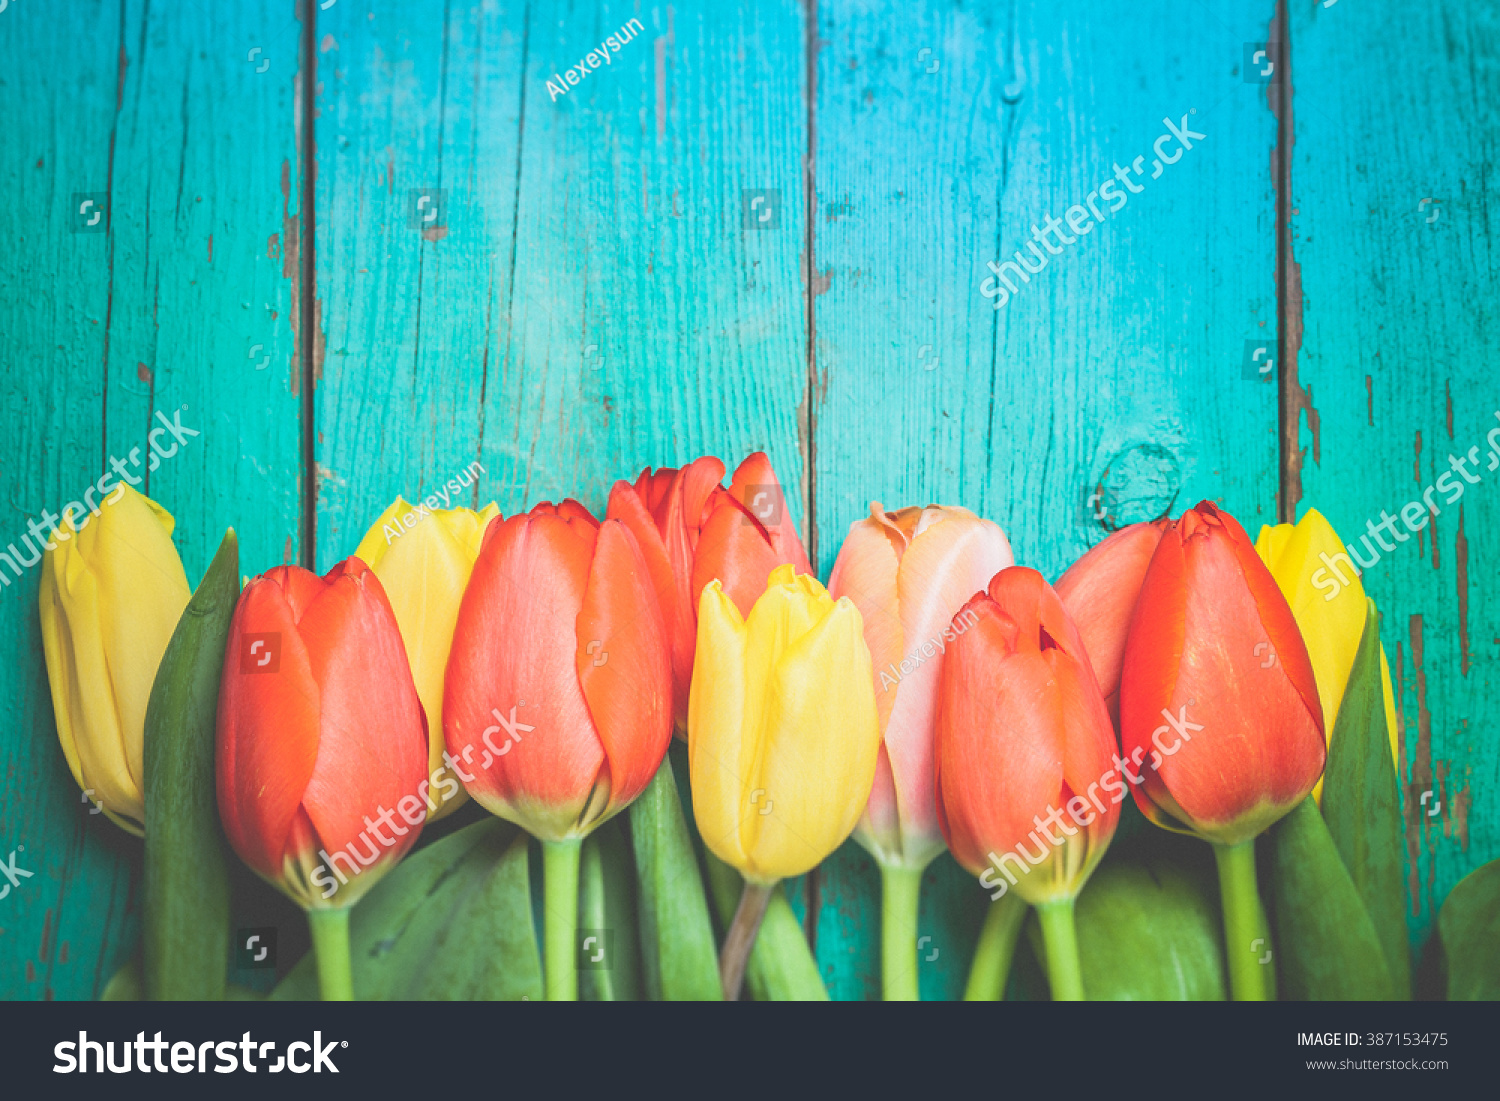 Toned photo. Color tone tuned. Fresh red tulip flowers bouquet on wood. Natural spring or Valentine's Day, Mother's Day theme.  #387153475